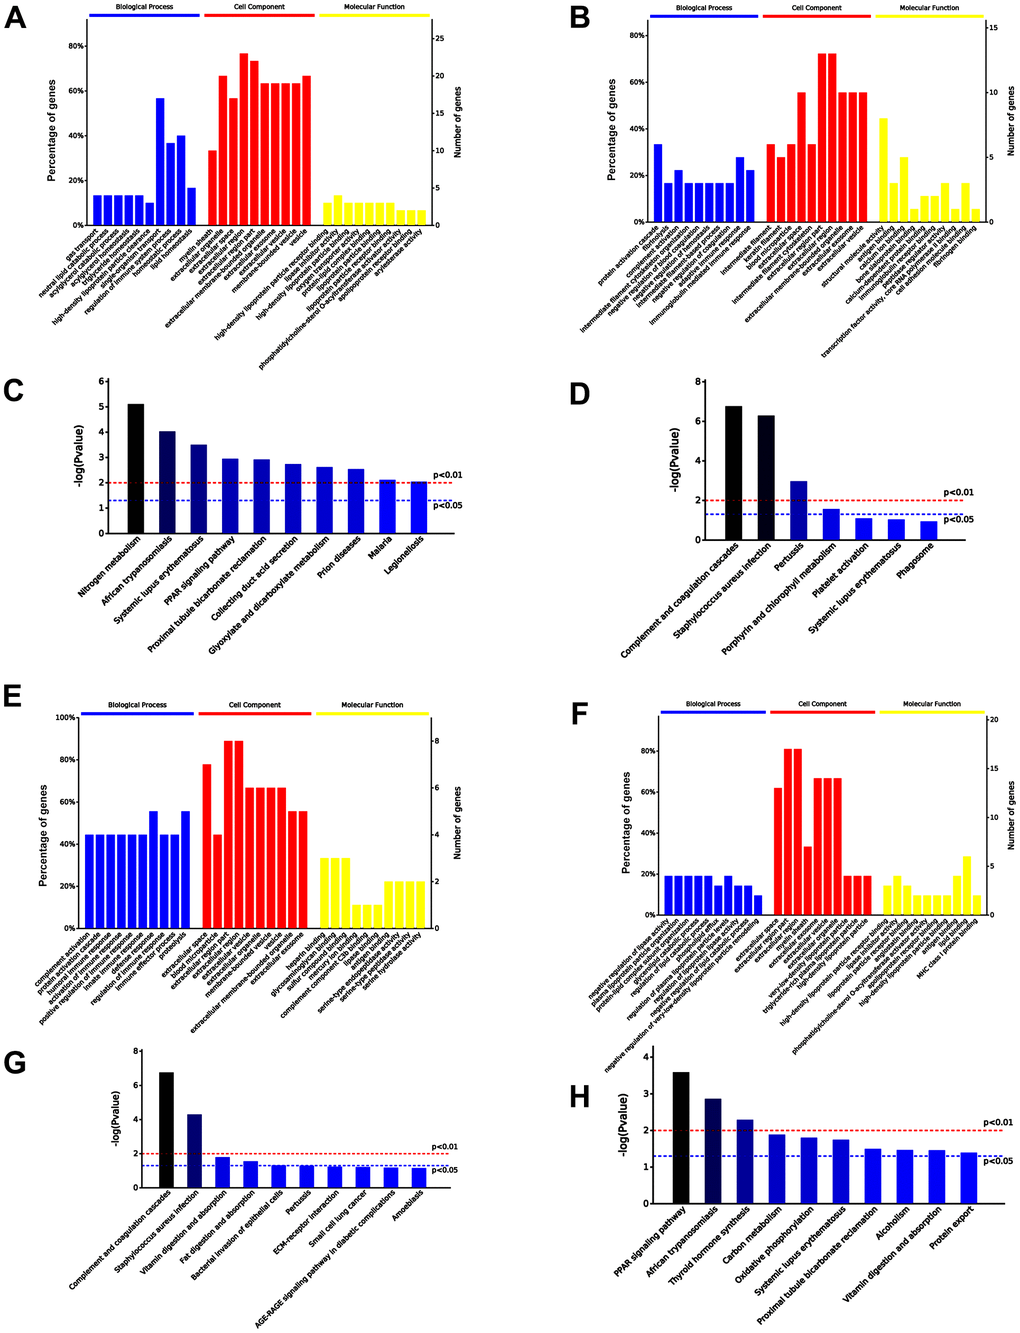 Comparison of serum exosomal proteins between untreated old mice and old mice pre-injected with iPSC-exosomes, and between untreated young mice and young mice pre-injected with iPSC-exosomes groups. (A, B) GO functional annotation of the up- and the down-regulated exosomal proteins in old mice pre-injected with iPSC-exosomes, respectively. (C, D) KEGG pathway enrichment analysis of up- and down-regulated exosomal proteins in old mice pre-injected with iPSC-exosomes, respectively. (E, F) GO functional annotation of the up- and the down-regulated exosomal proteins in young mice pre-injected with iPSC-exosomes group, respectively. (G, H) KEGG pathway enrichment analysis of up- and down-regulated exosomal proteins of young mice pre-injected with iPSC-exosomes group. BP, biological process; MF, molecular function; CC, cellular component.